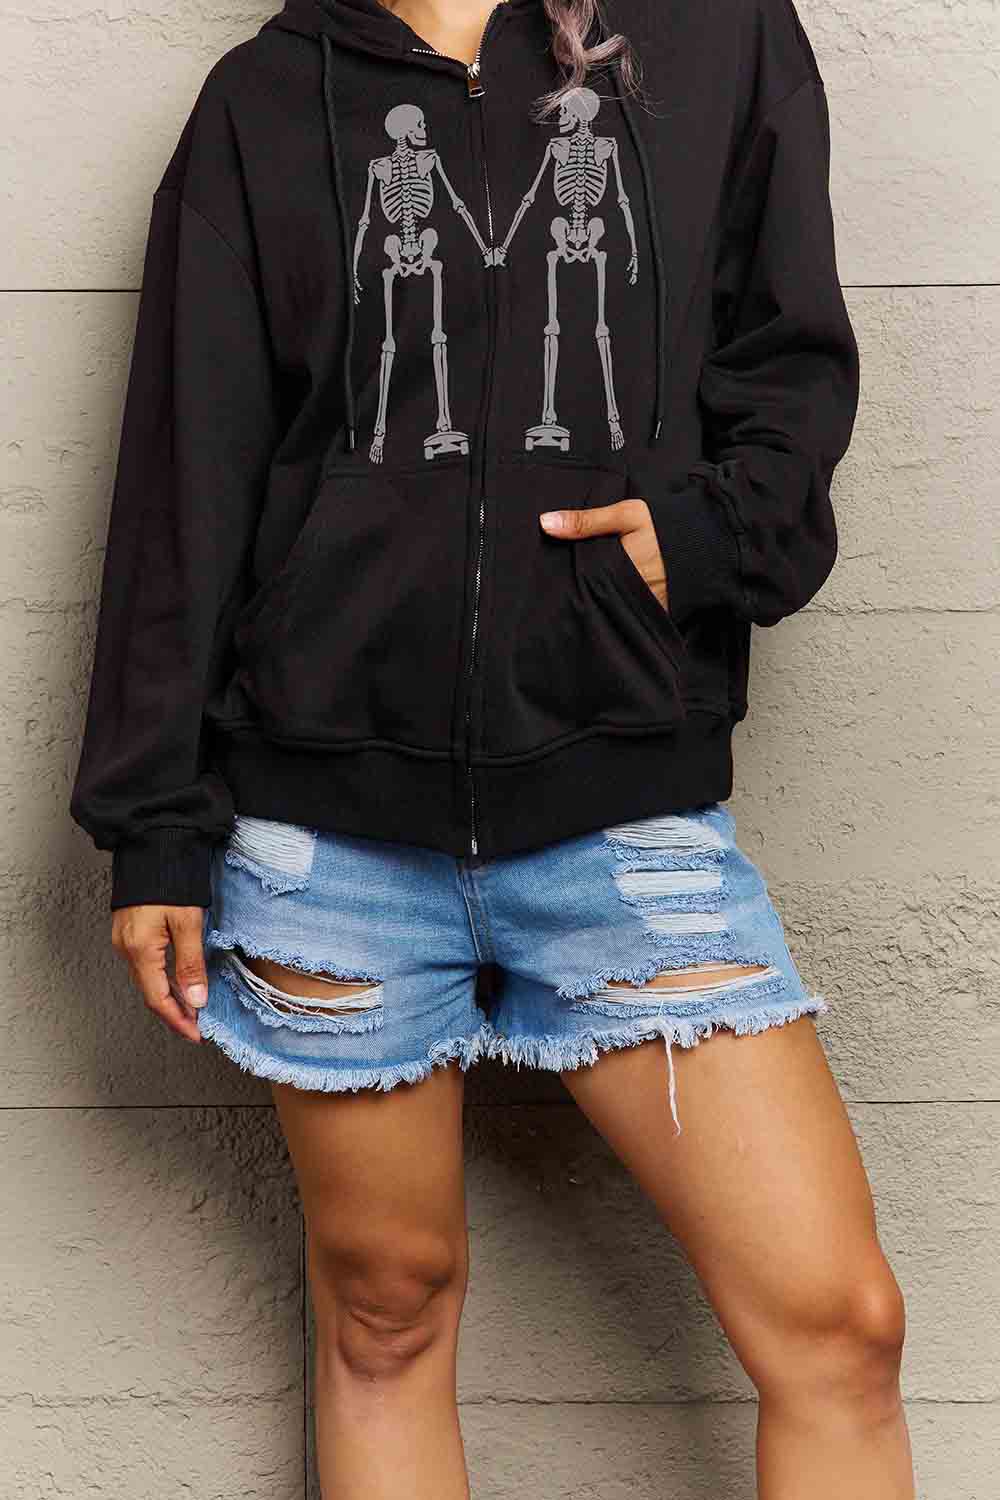 Full Size Skeleton Graphic Hoodie - Women’s Clothing & Accessories - Shirts & Tops - 4 - 2024